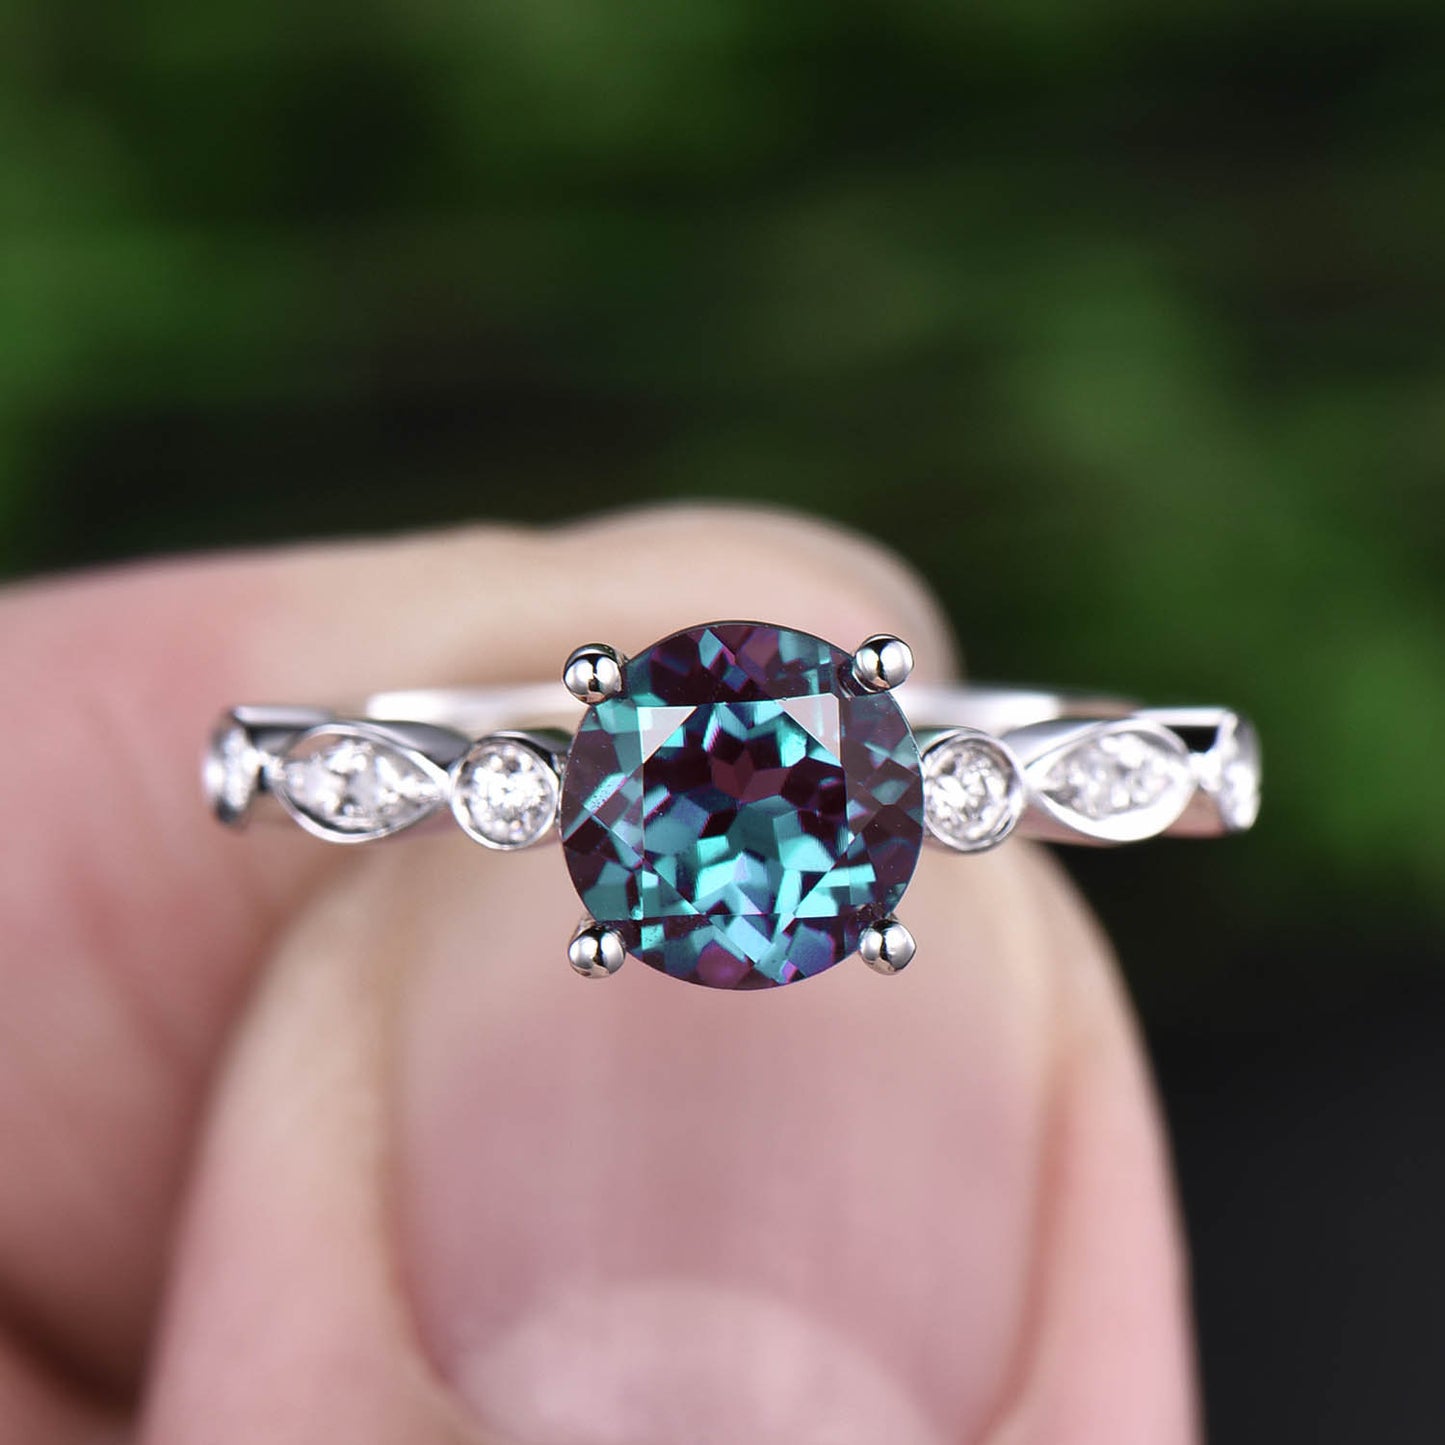 Alexandrite engagement ring rose gold color change alexandrite ring gold vintage marquise art deco diamond ring wedding promise ring band